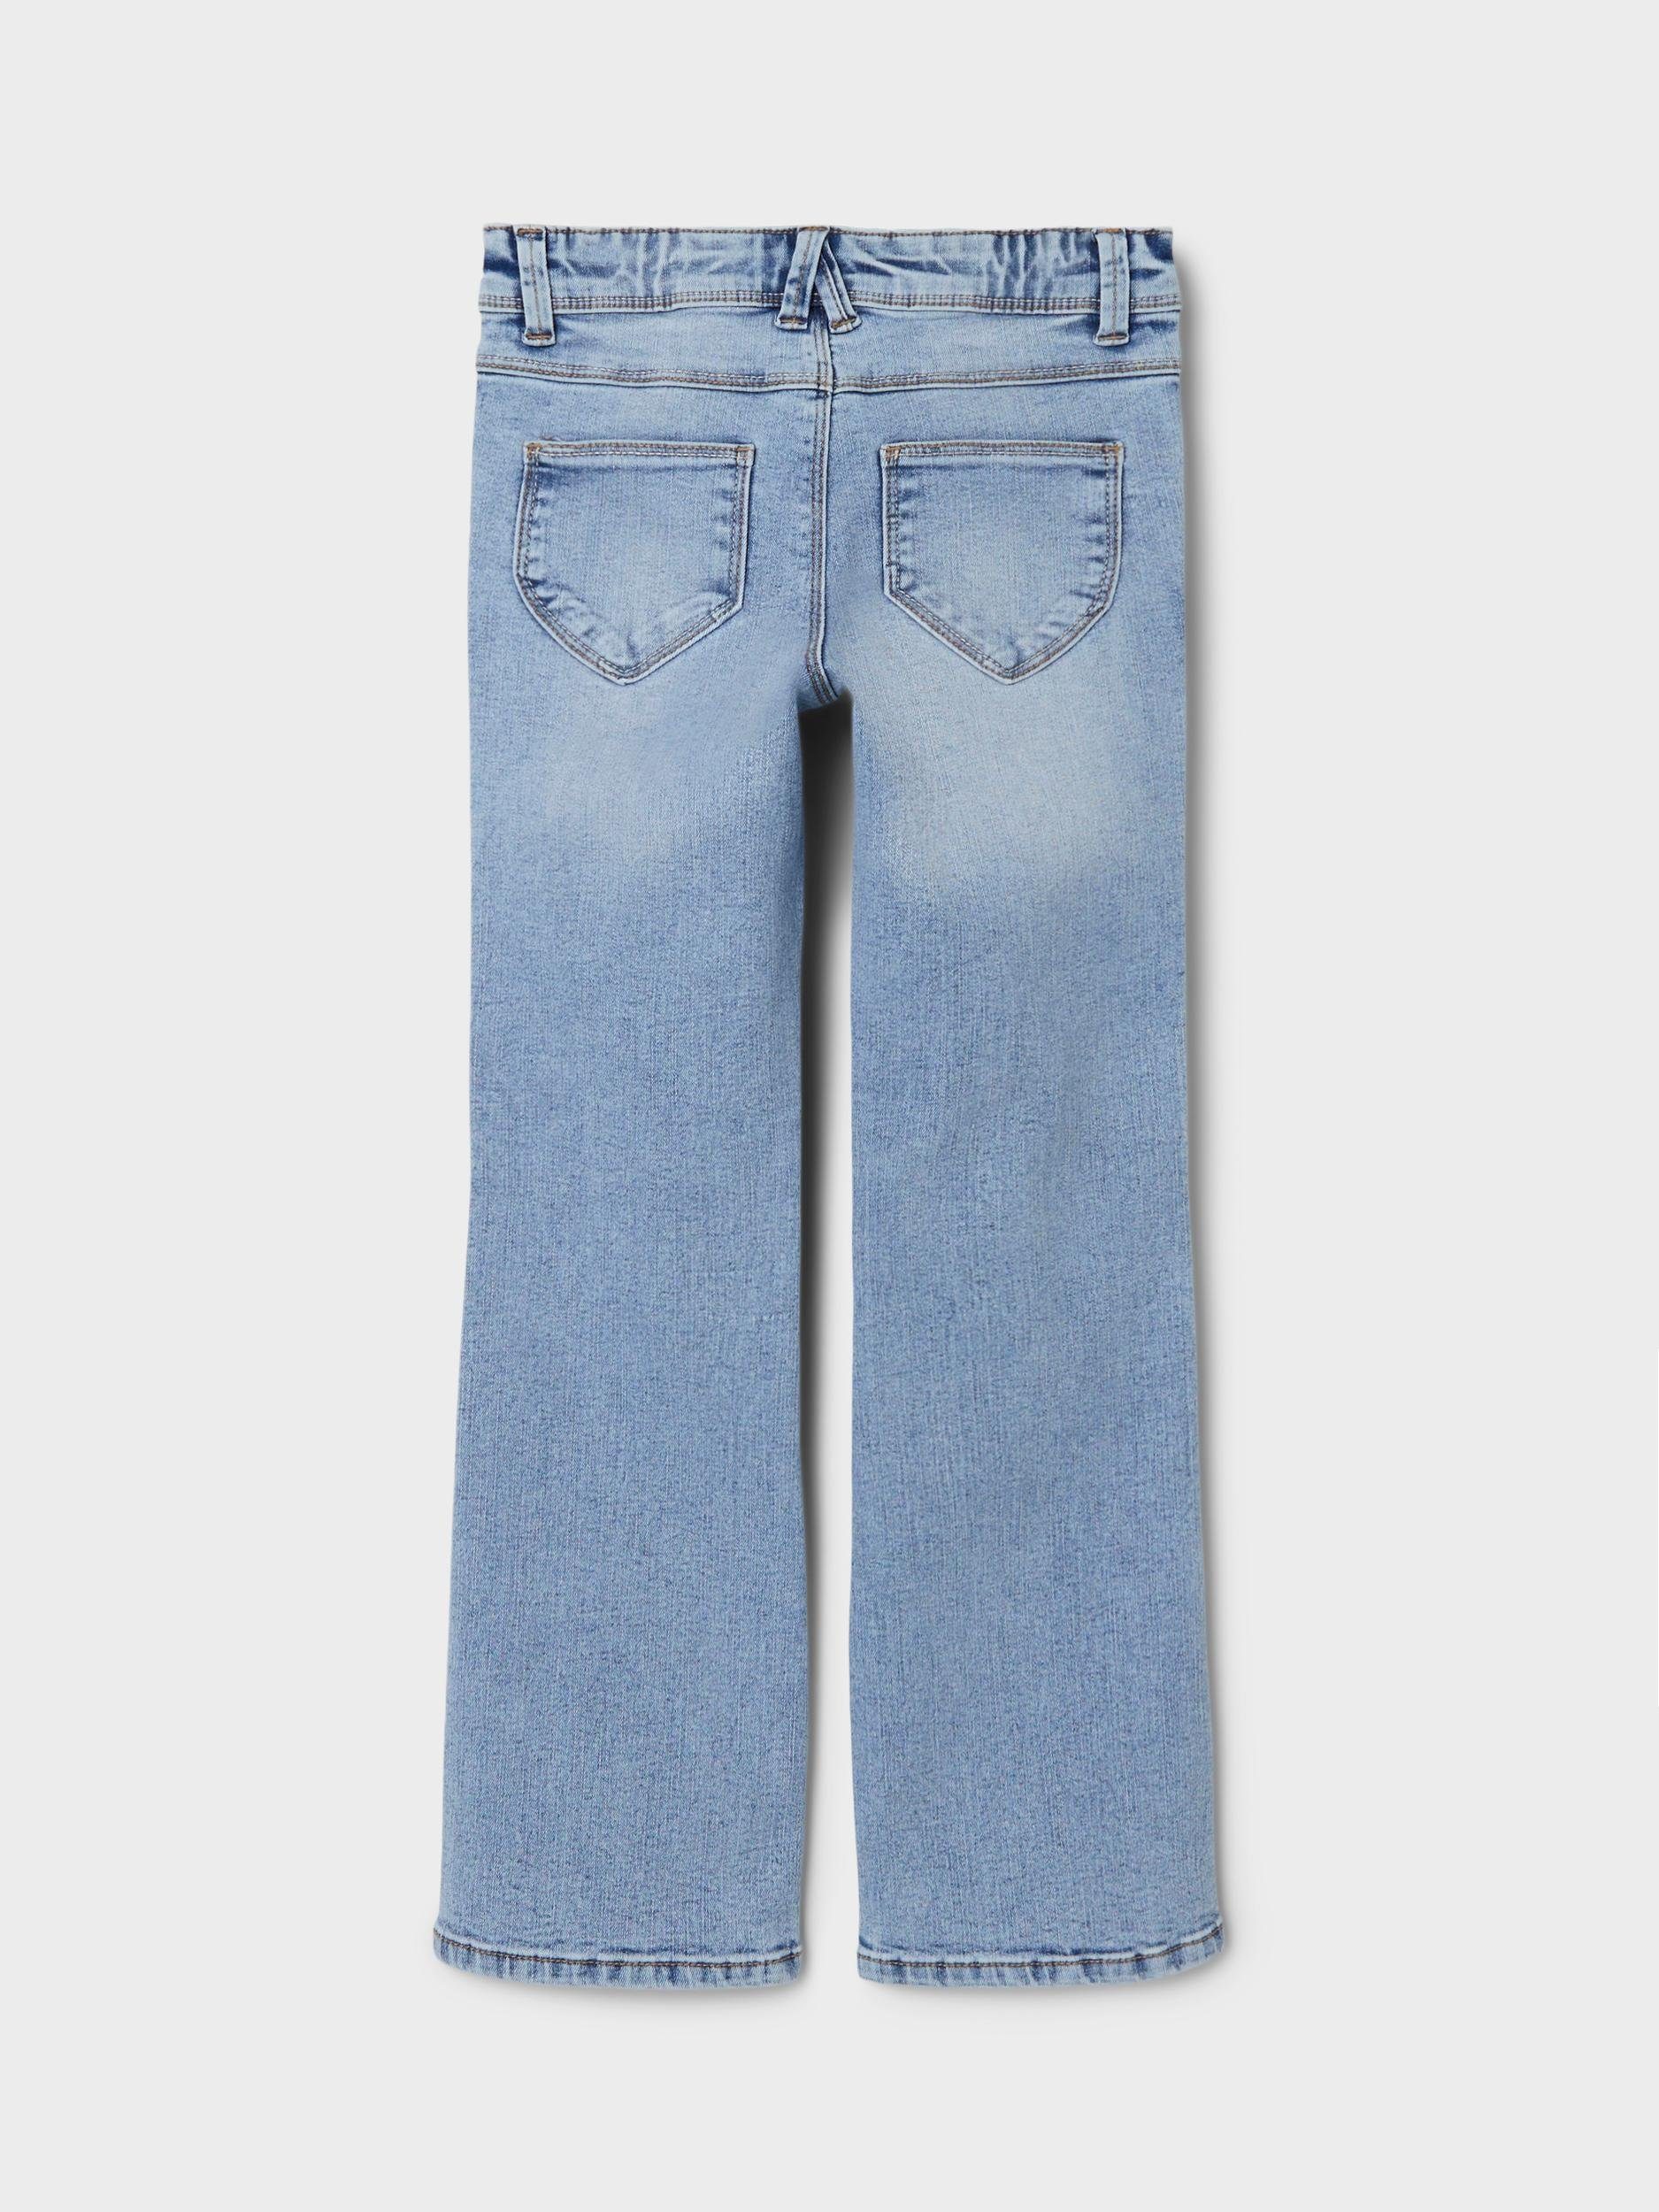 SKINNY Name NKFPOLLY JEANS mit Blue It 1142-AU NOOS Denim Stretch BOOT Light Bootcut-Jeans